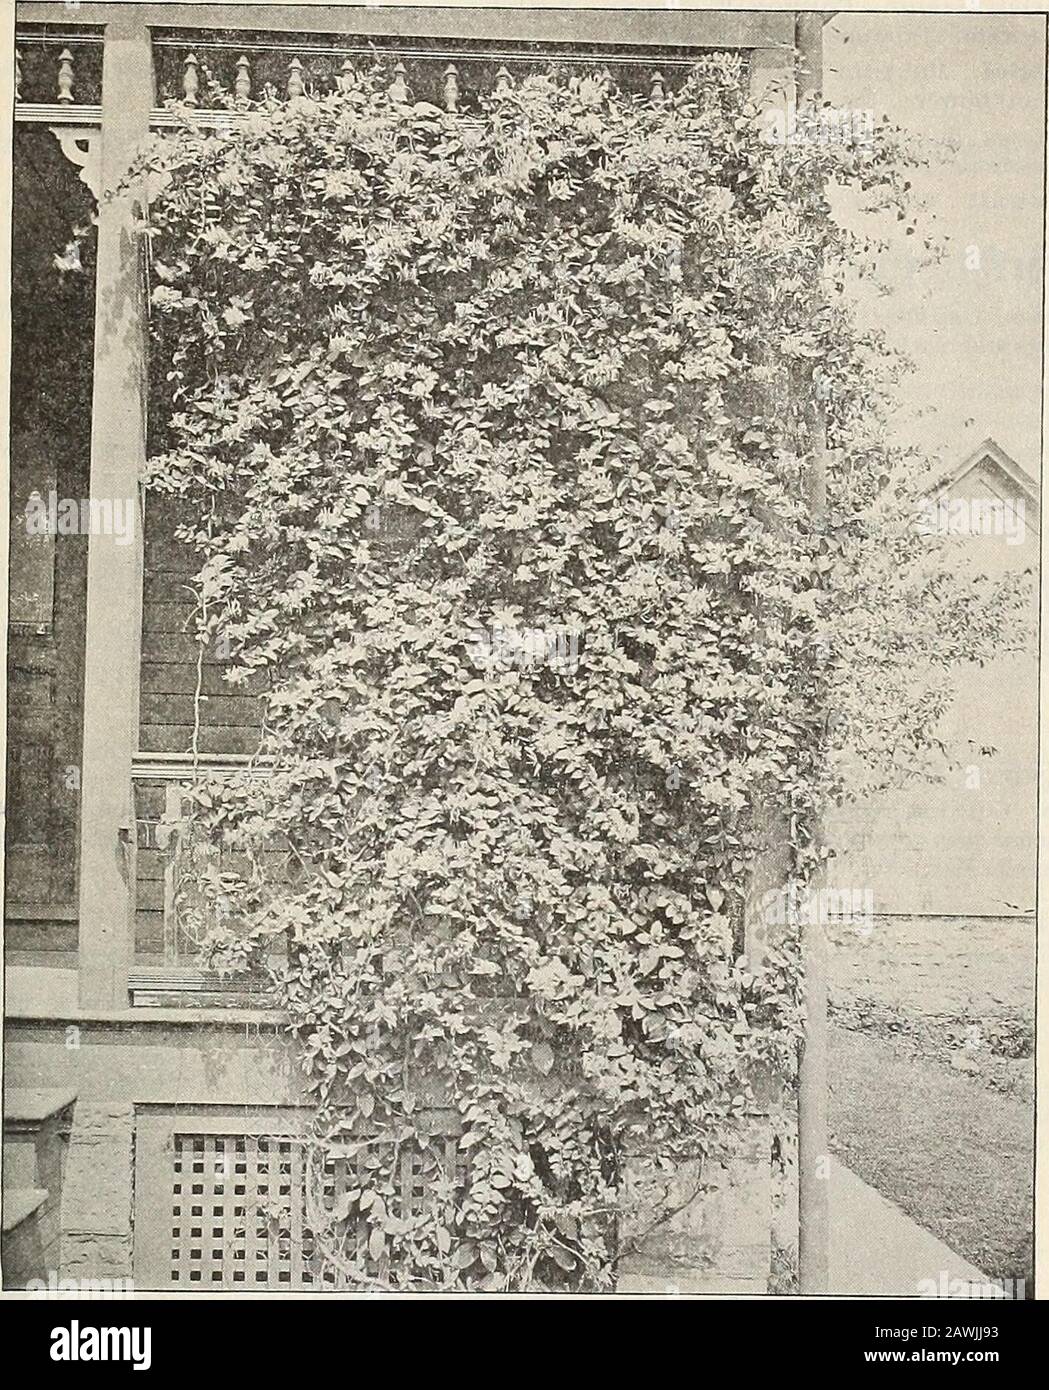 General catalogue of fruit and ornamental trees, shrubs, roses, etc . eason. 35c. CISSUS. C. variegata. Varieqated-leaved Cissus. A handsome running vine like a grape, with handsome variegatedthree-lobed leaves, and small clusters of dark colored fruit. 35c. CLEMATIS. Virgins Bower. Waldrebe, Ger. Clematite, Fr. None among hardy perennials exceed in beauty and effectiveness the finer sorts of Clematis. As a climber forthe veranda, a screen for fences, for pillars along the garden walks, for training on walls or arbors, in masses onrockwork, or cultivation in pots, it has no rival among strong- Stock Photo